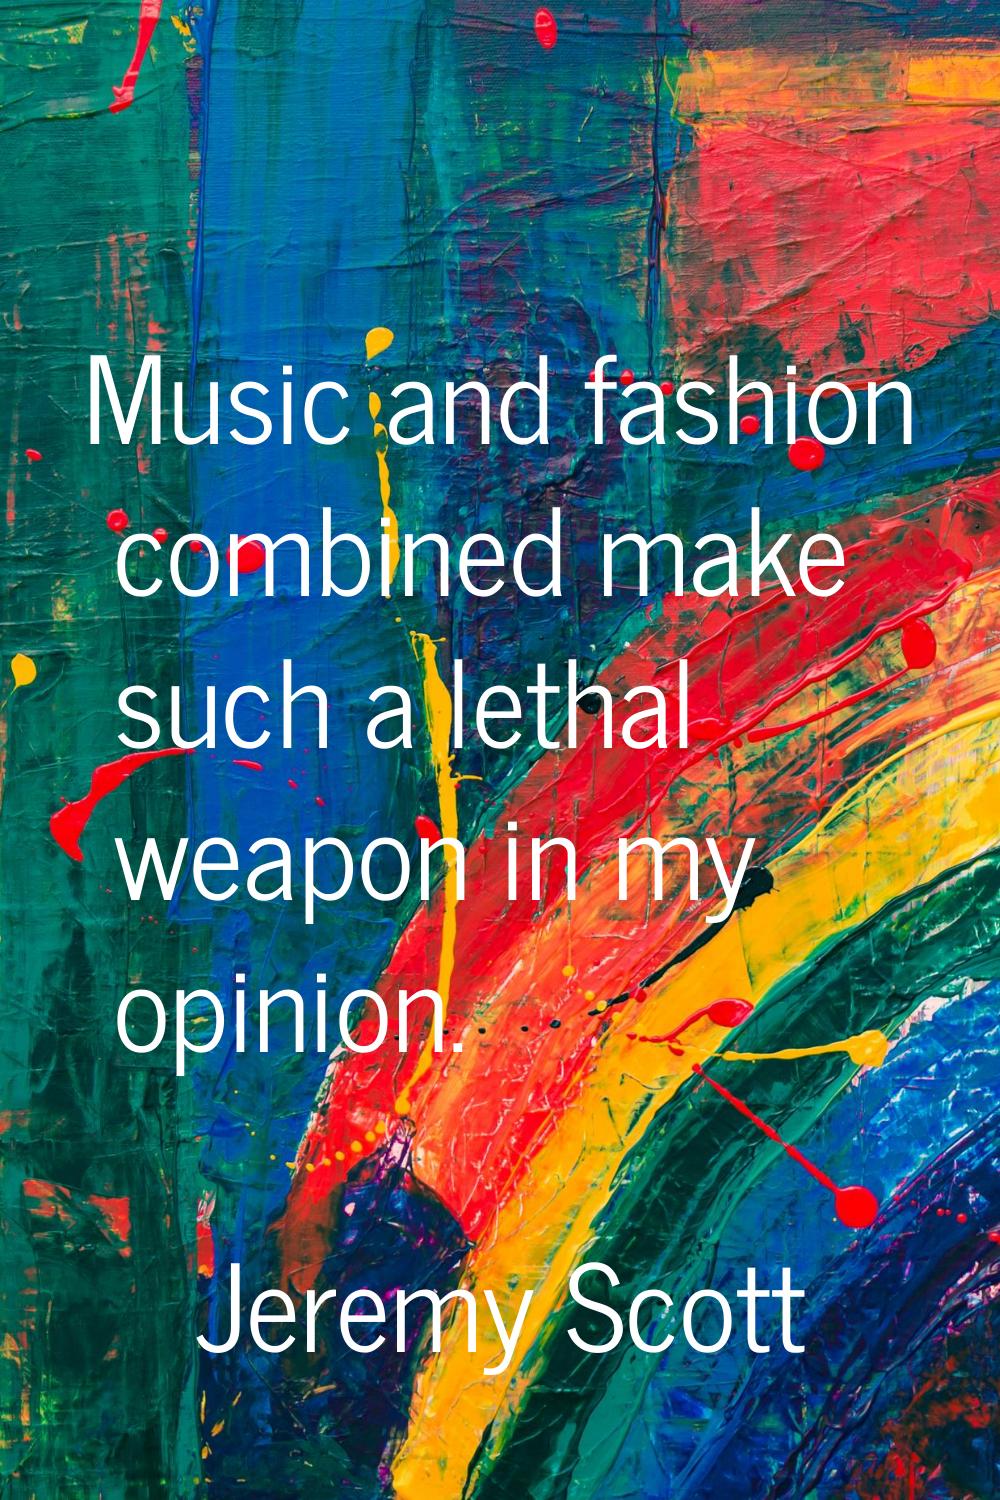 Music and fashion combined make such a lethal weapon in my opinion.